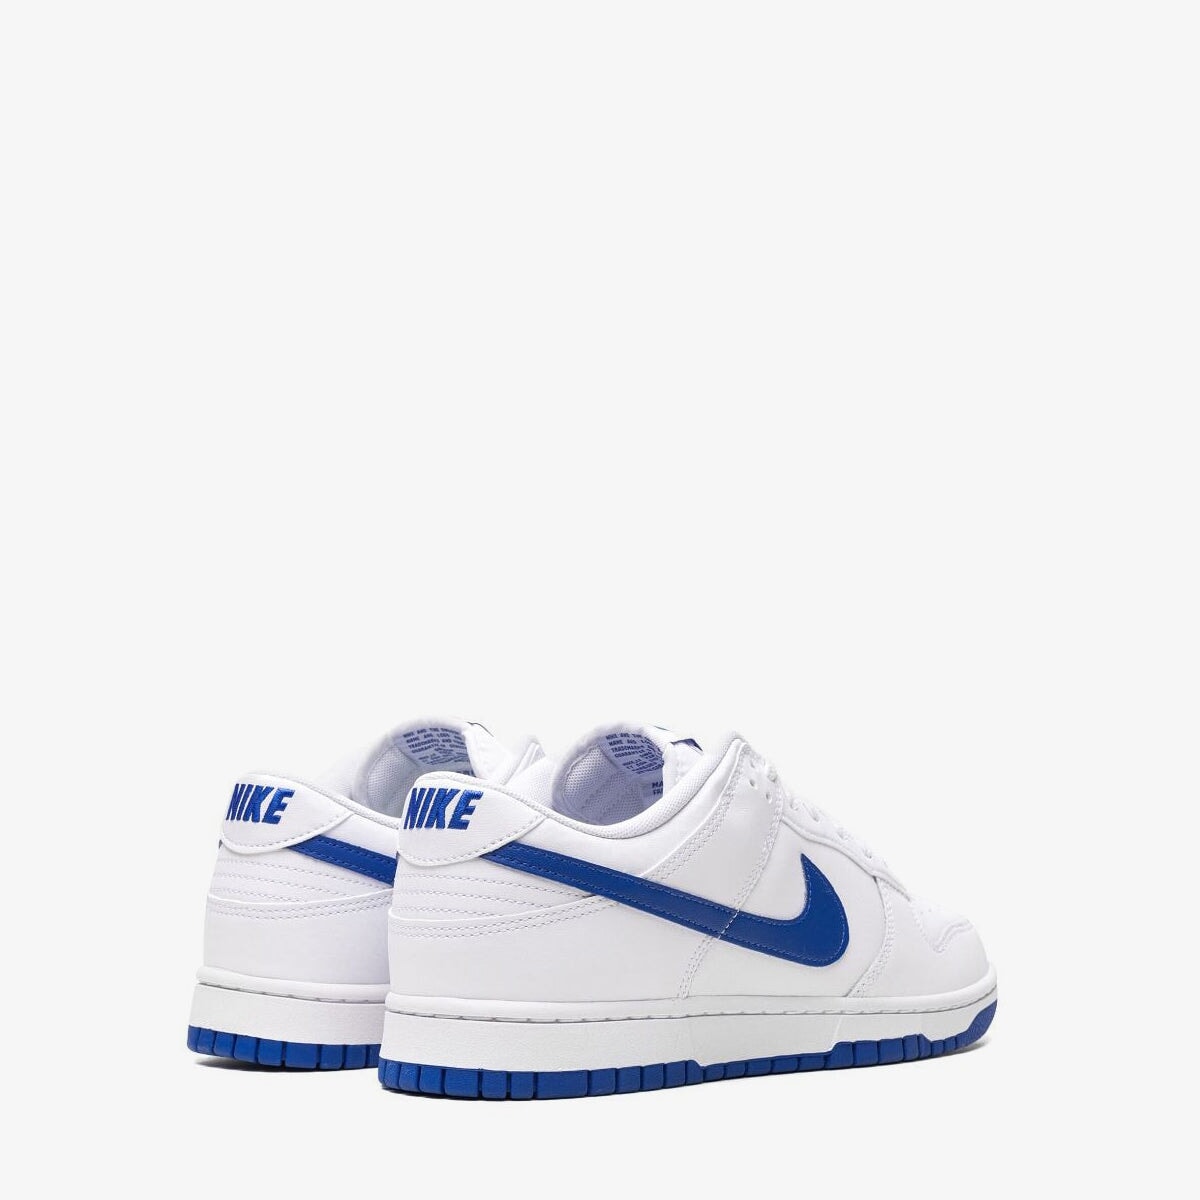 Nike Dunk Low “White Hyper Royal” – Plug and Play